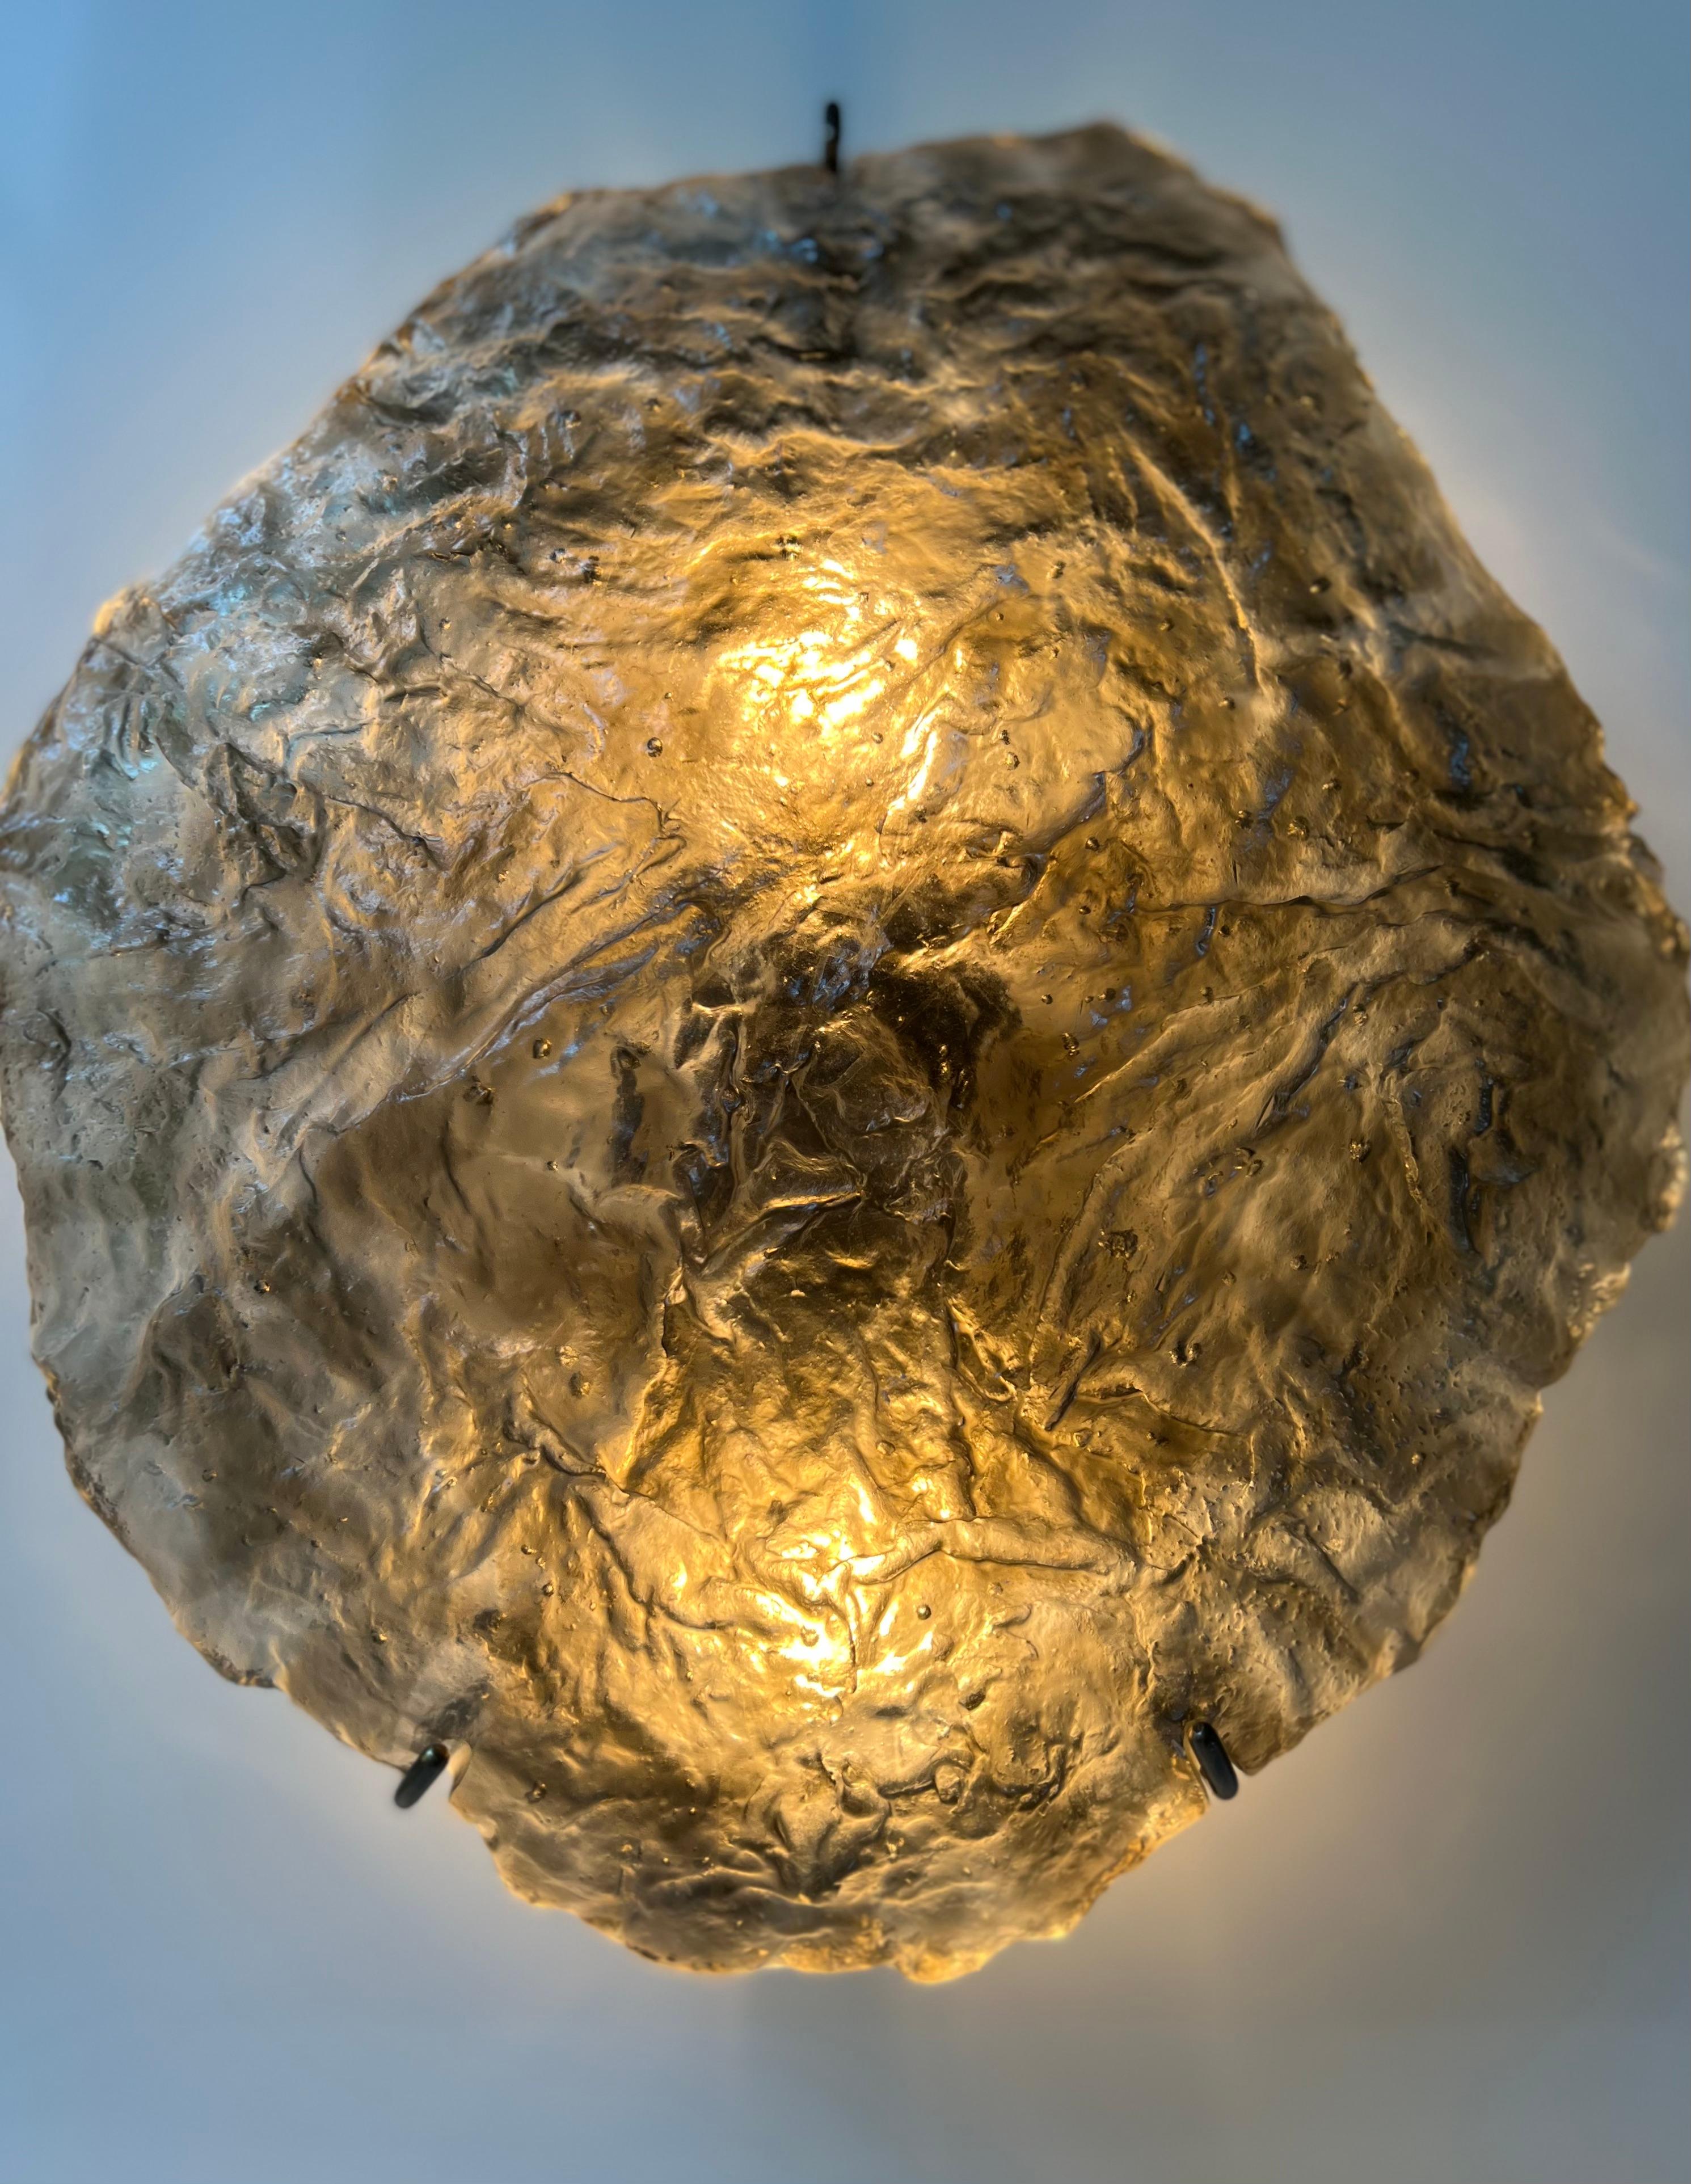 This hand-sculpted glass sconce has two regular bulbs. The installation is simple where a metal plate attaches to a wall. Three metal hooks hold the glass itself. The glass is cast in olive color in a unique technique practiced by the artist,